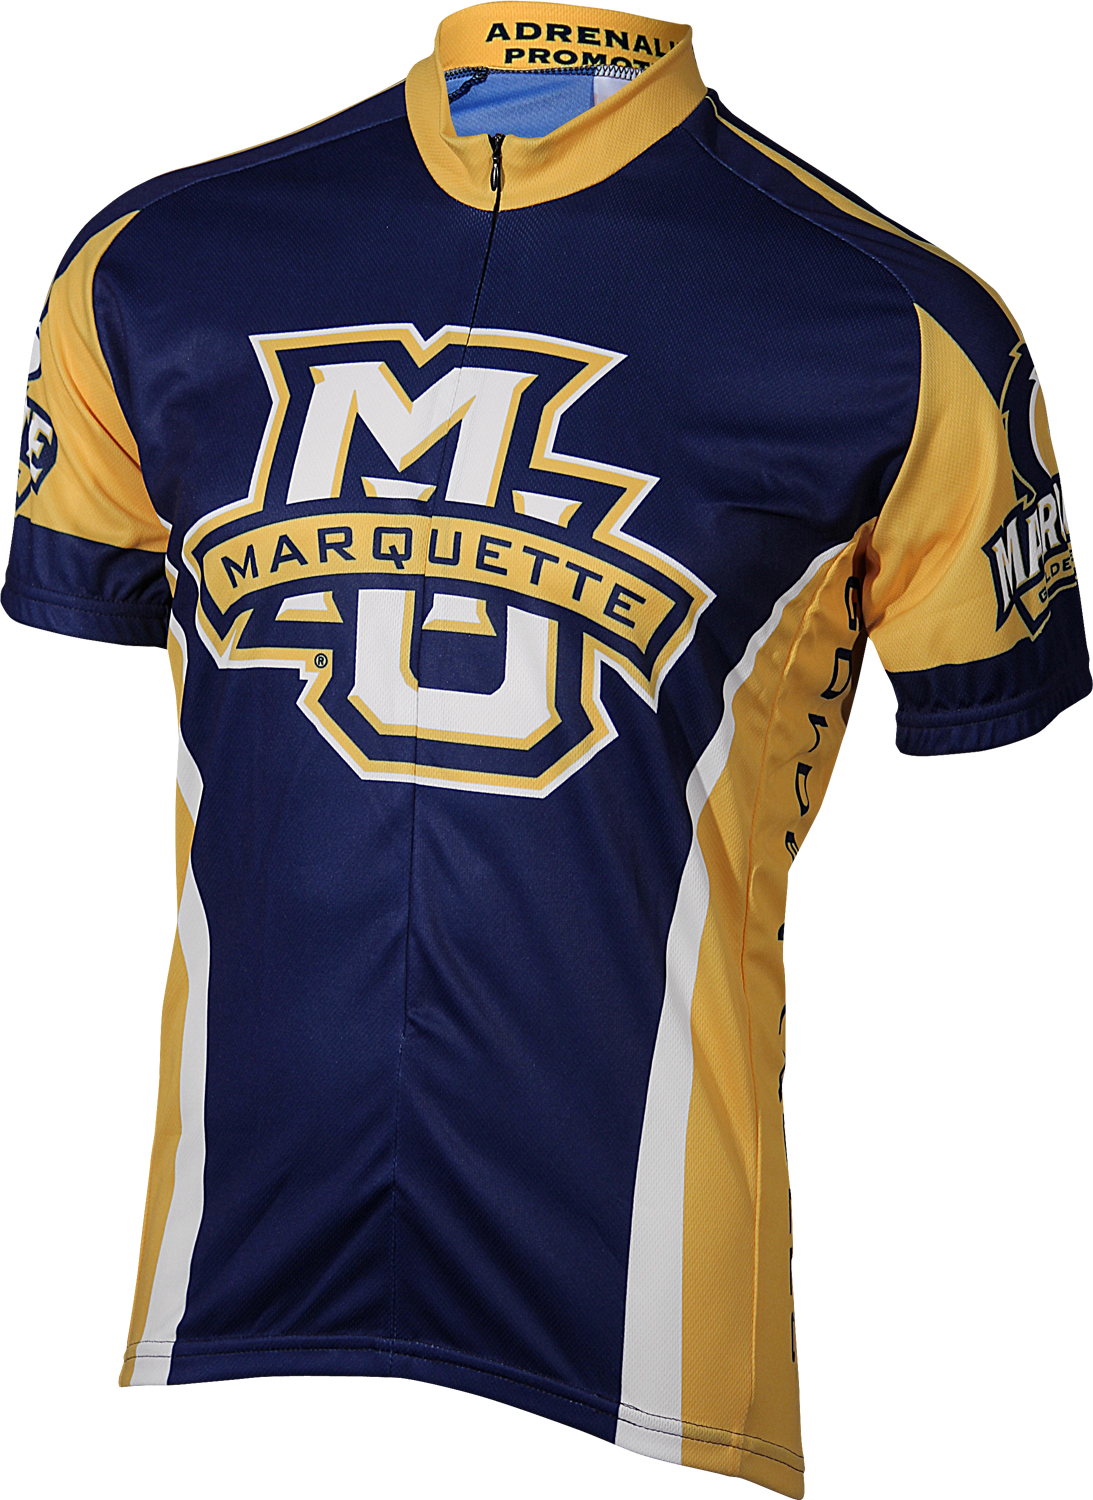 Marquette University Golden Eagles Cycling Jersey